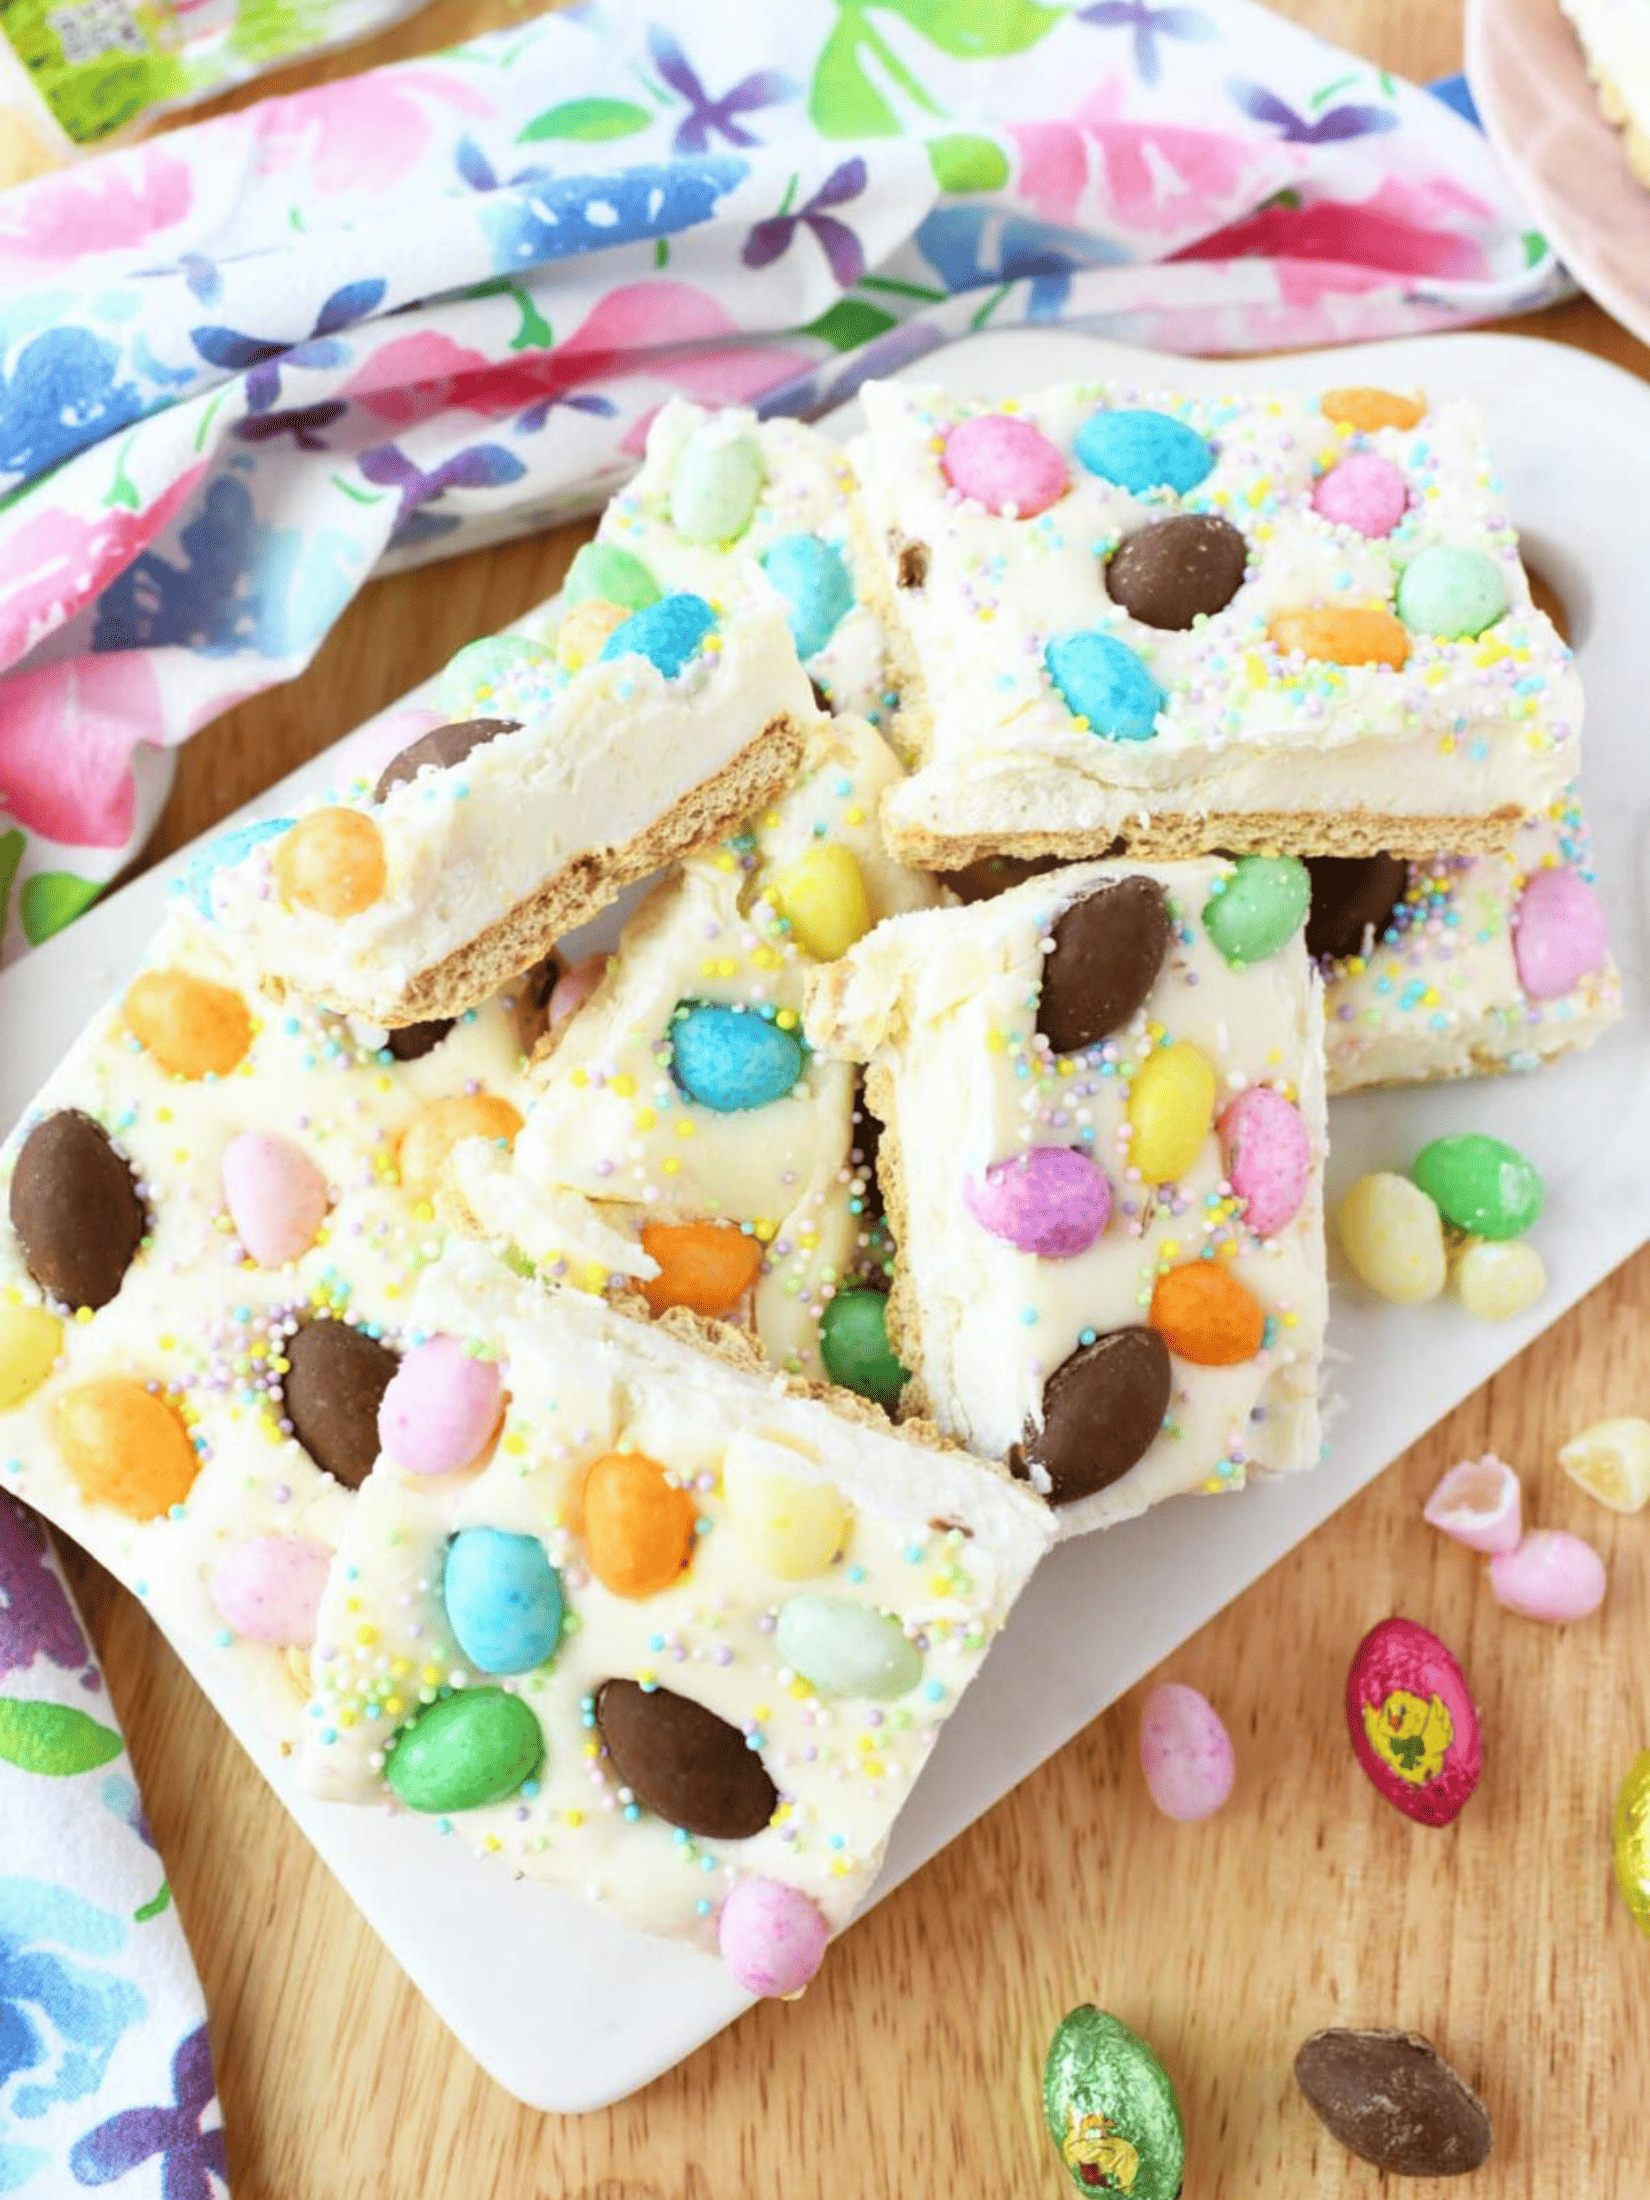 a sweet delight of Easter-themed s'mores candy bark adorned with pastel-colored candies.